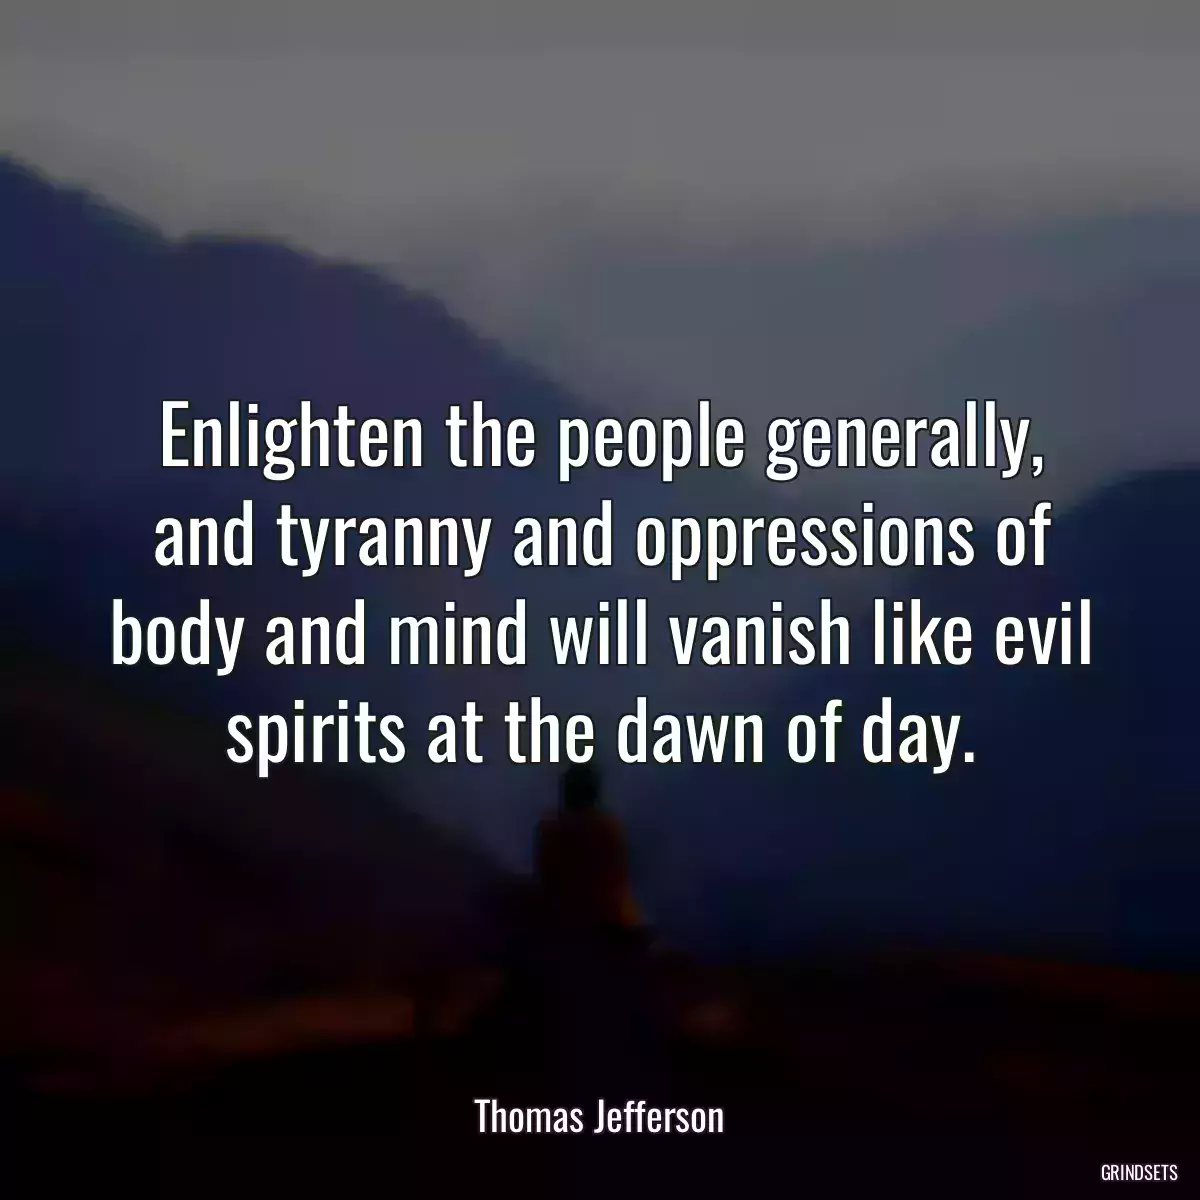 Enlighten the people generally, and tyranny and oppressions of body and mind will vanish like evil spirits at the dawn of day.